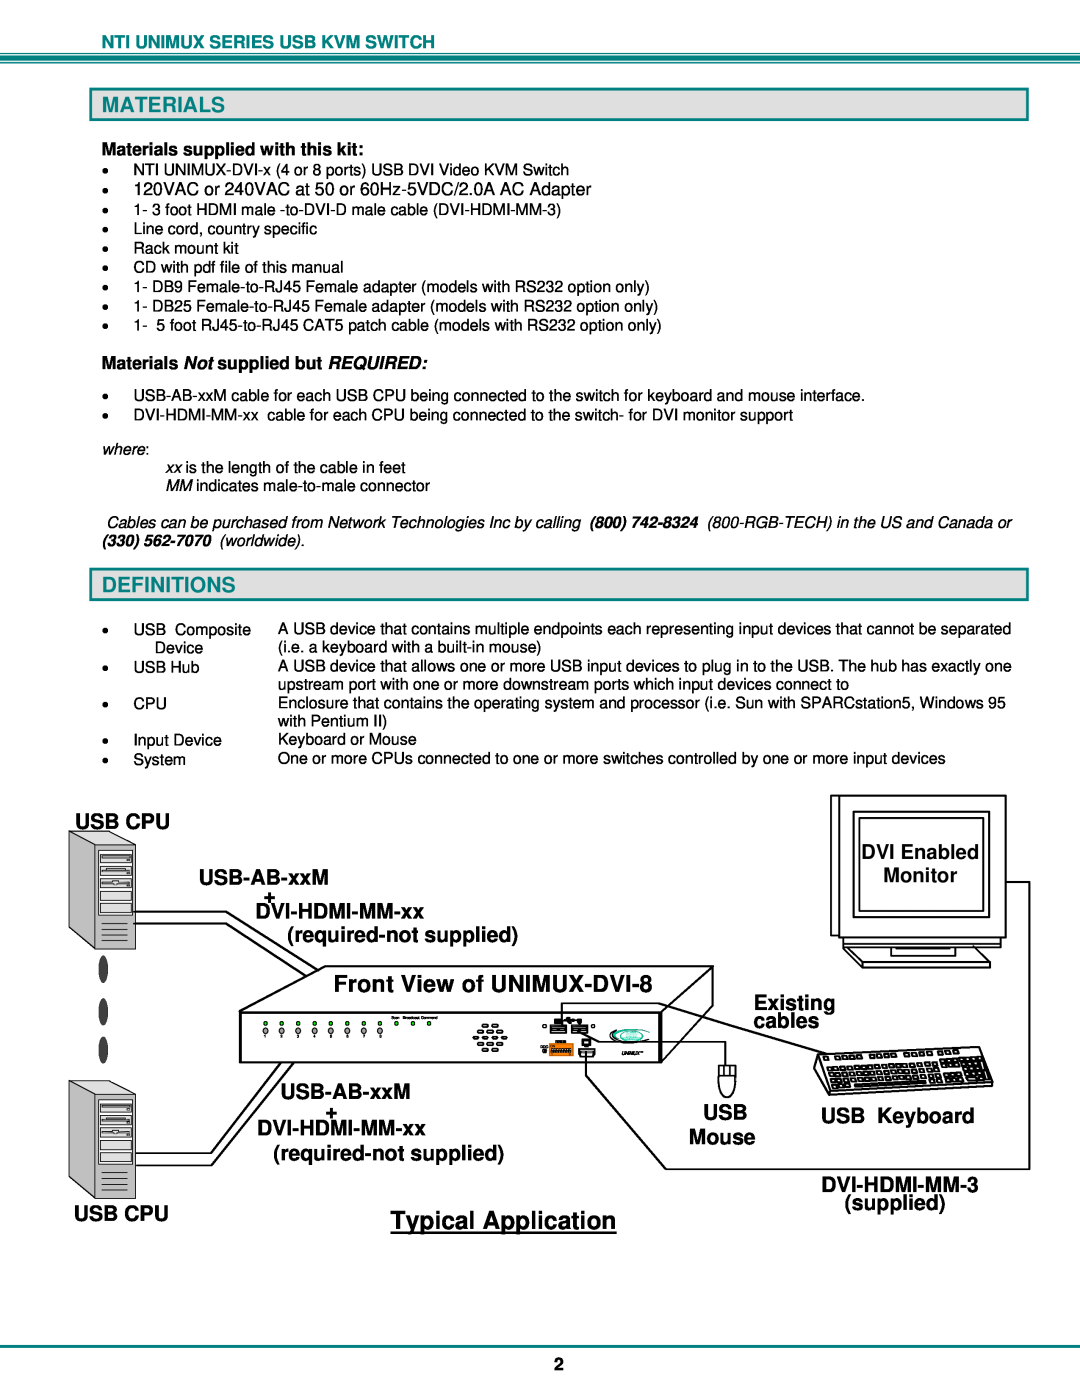 Network Technologies DVI-x operation manual Typical Application, Front View of UNIMUX-DVI-8, Materials, Definitions 